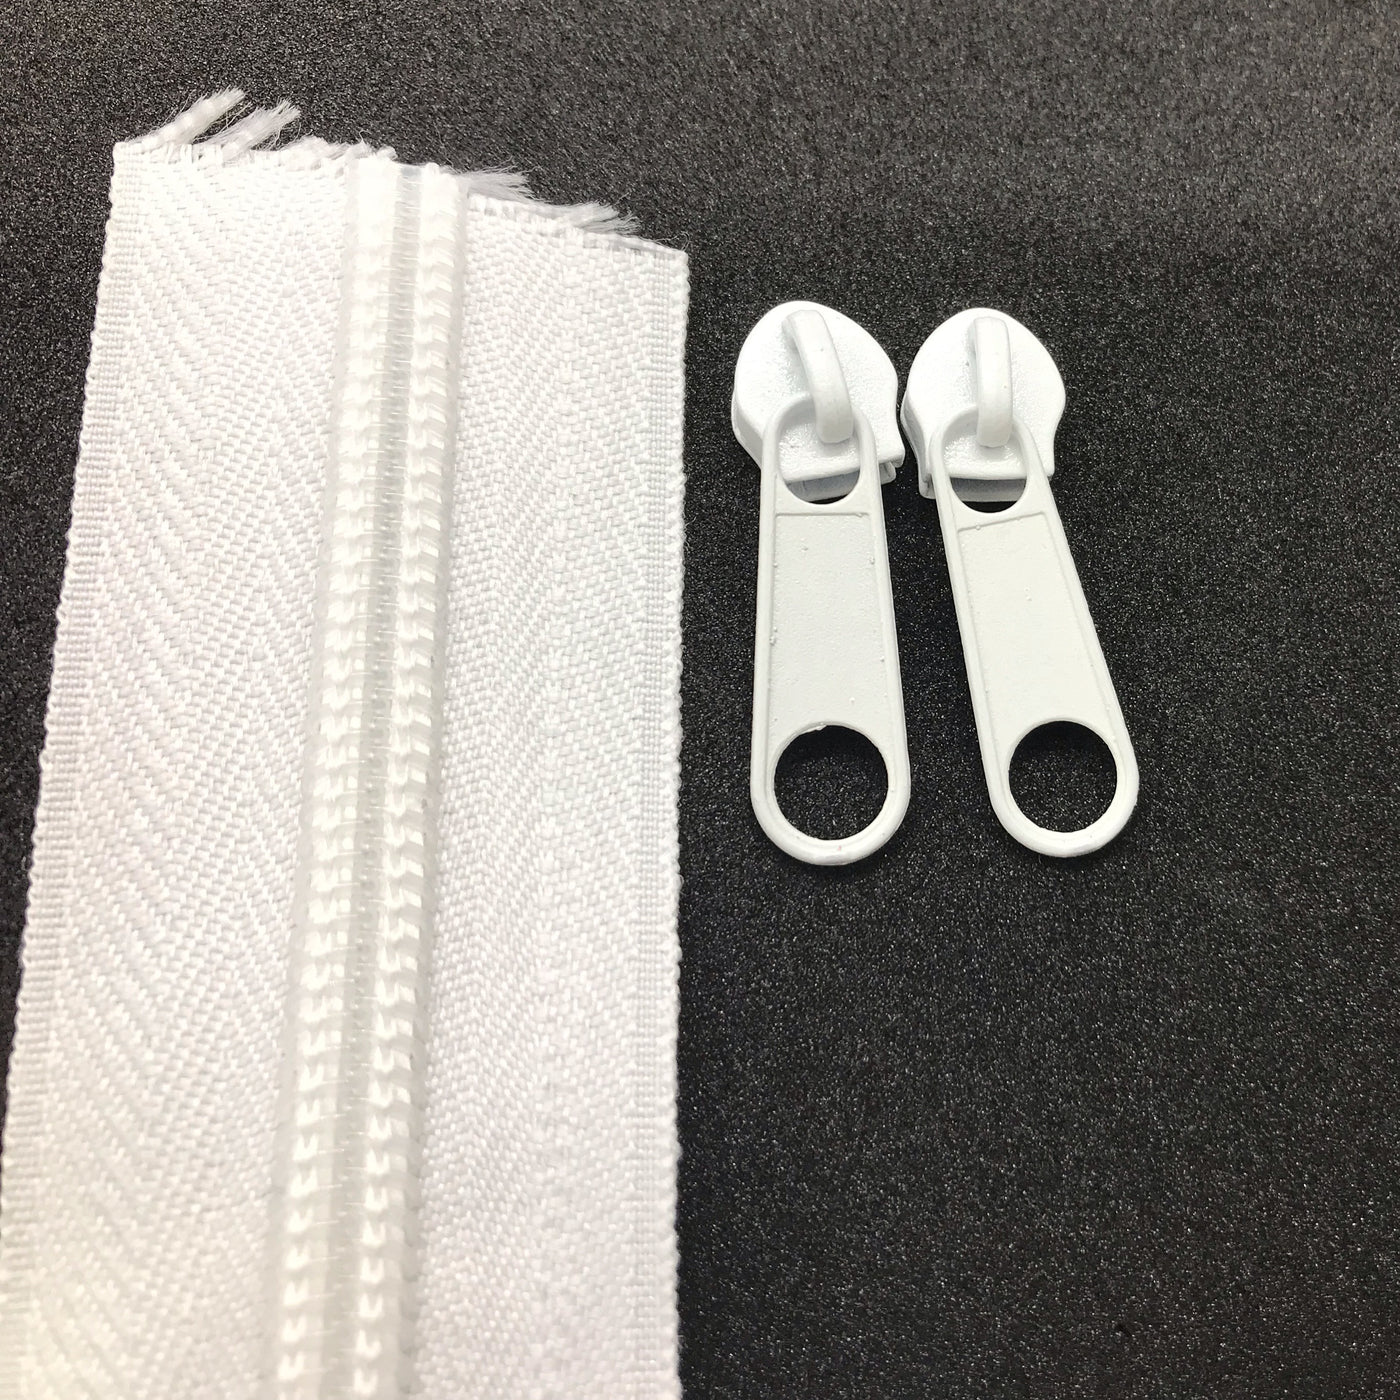 Photo of ivory continuous zipper rolls in size  5, available in various colors. Matching sliders/zipper heads included at 2 per meter. Size 5 refers to the size of the coils when closed at 5mm